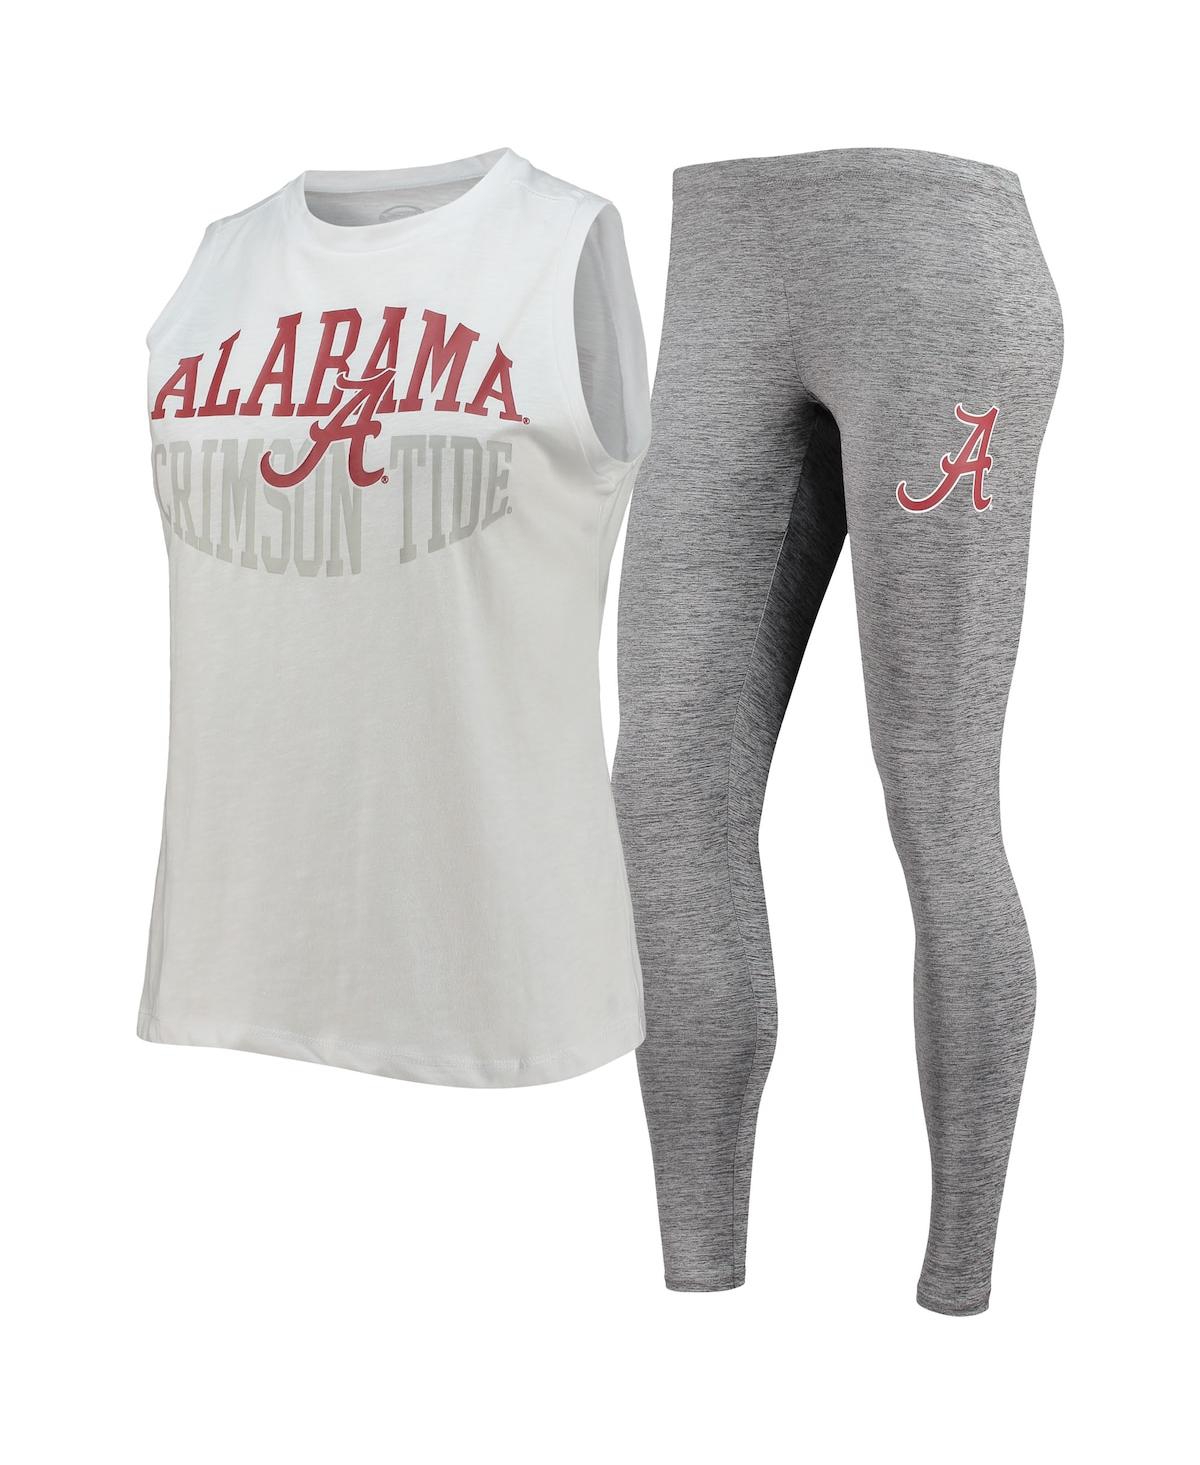 Women's Concepts Sport Charcoal and White Alabama Crimson Tide Tank Top and Leggings Sleep Set - Charcoal, White